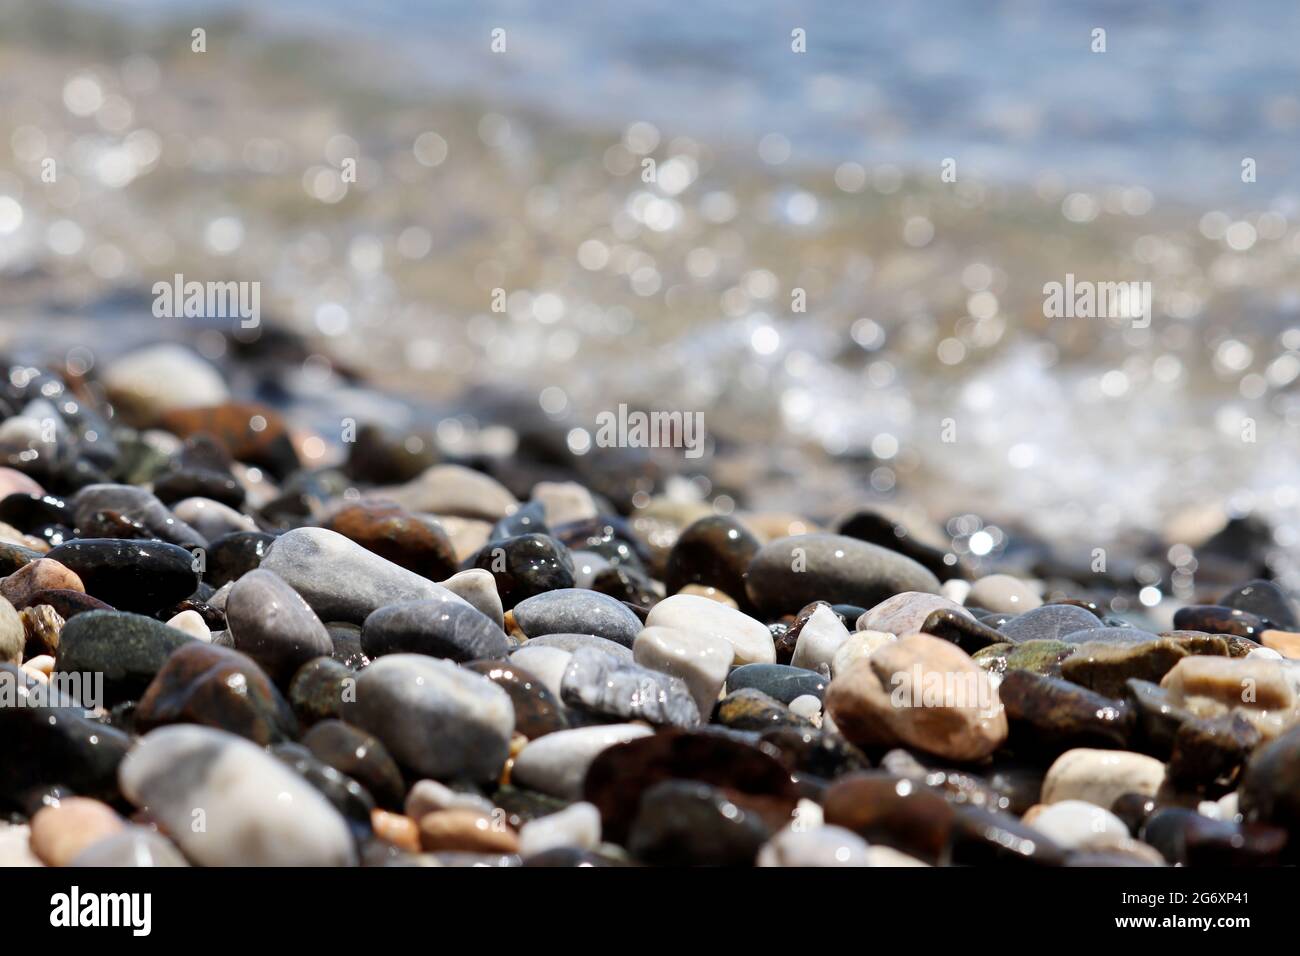 Wet pebble stones on blurred background of sea waves. Beach vacation at summer Stock Photo